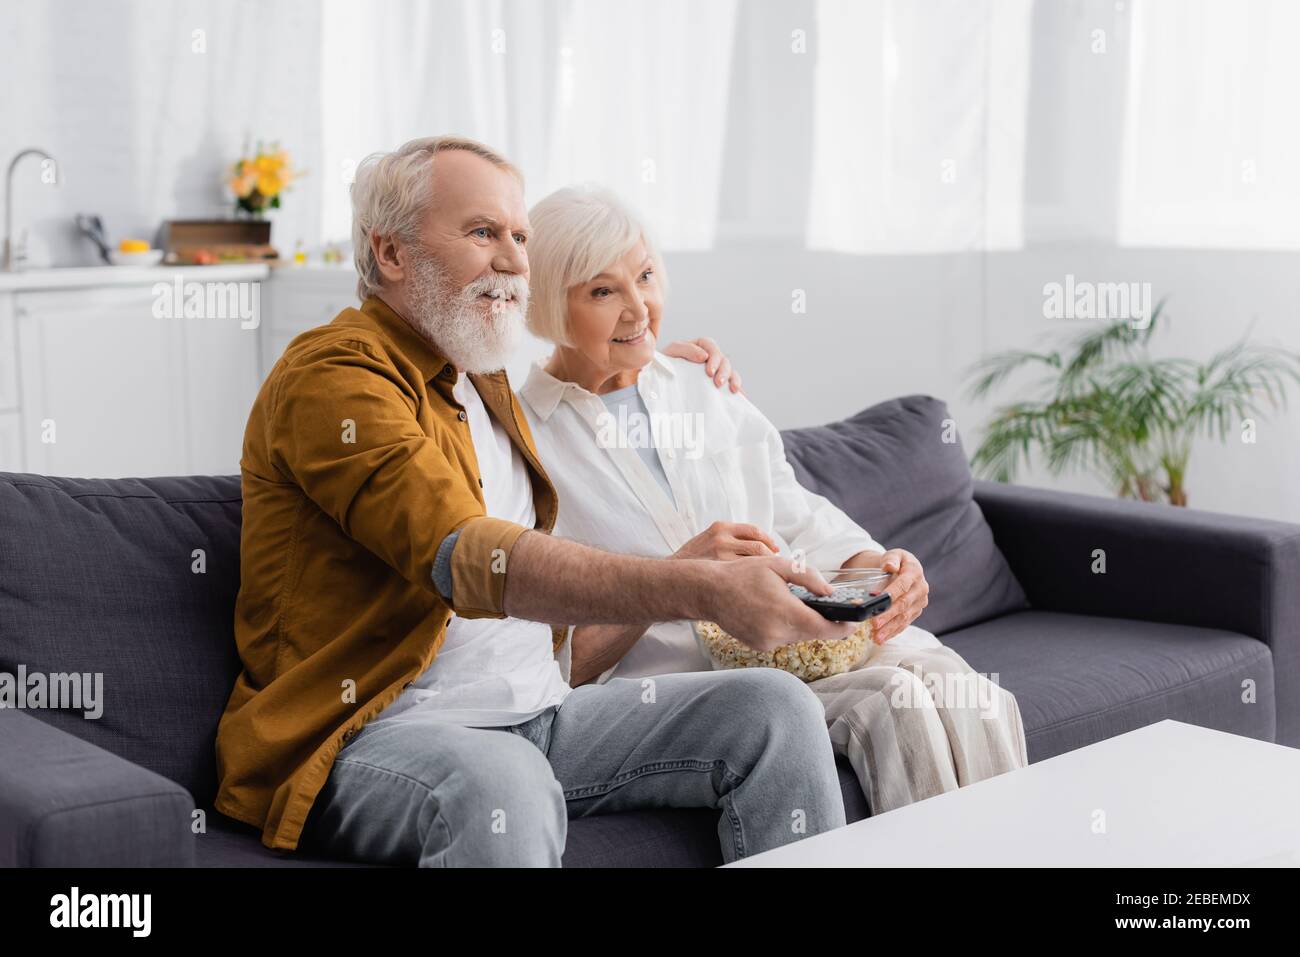 Smiling elderly couple watching tv with popcorn on couch Stock Photo